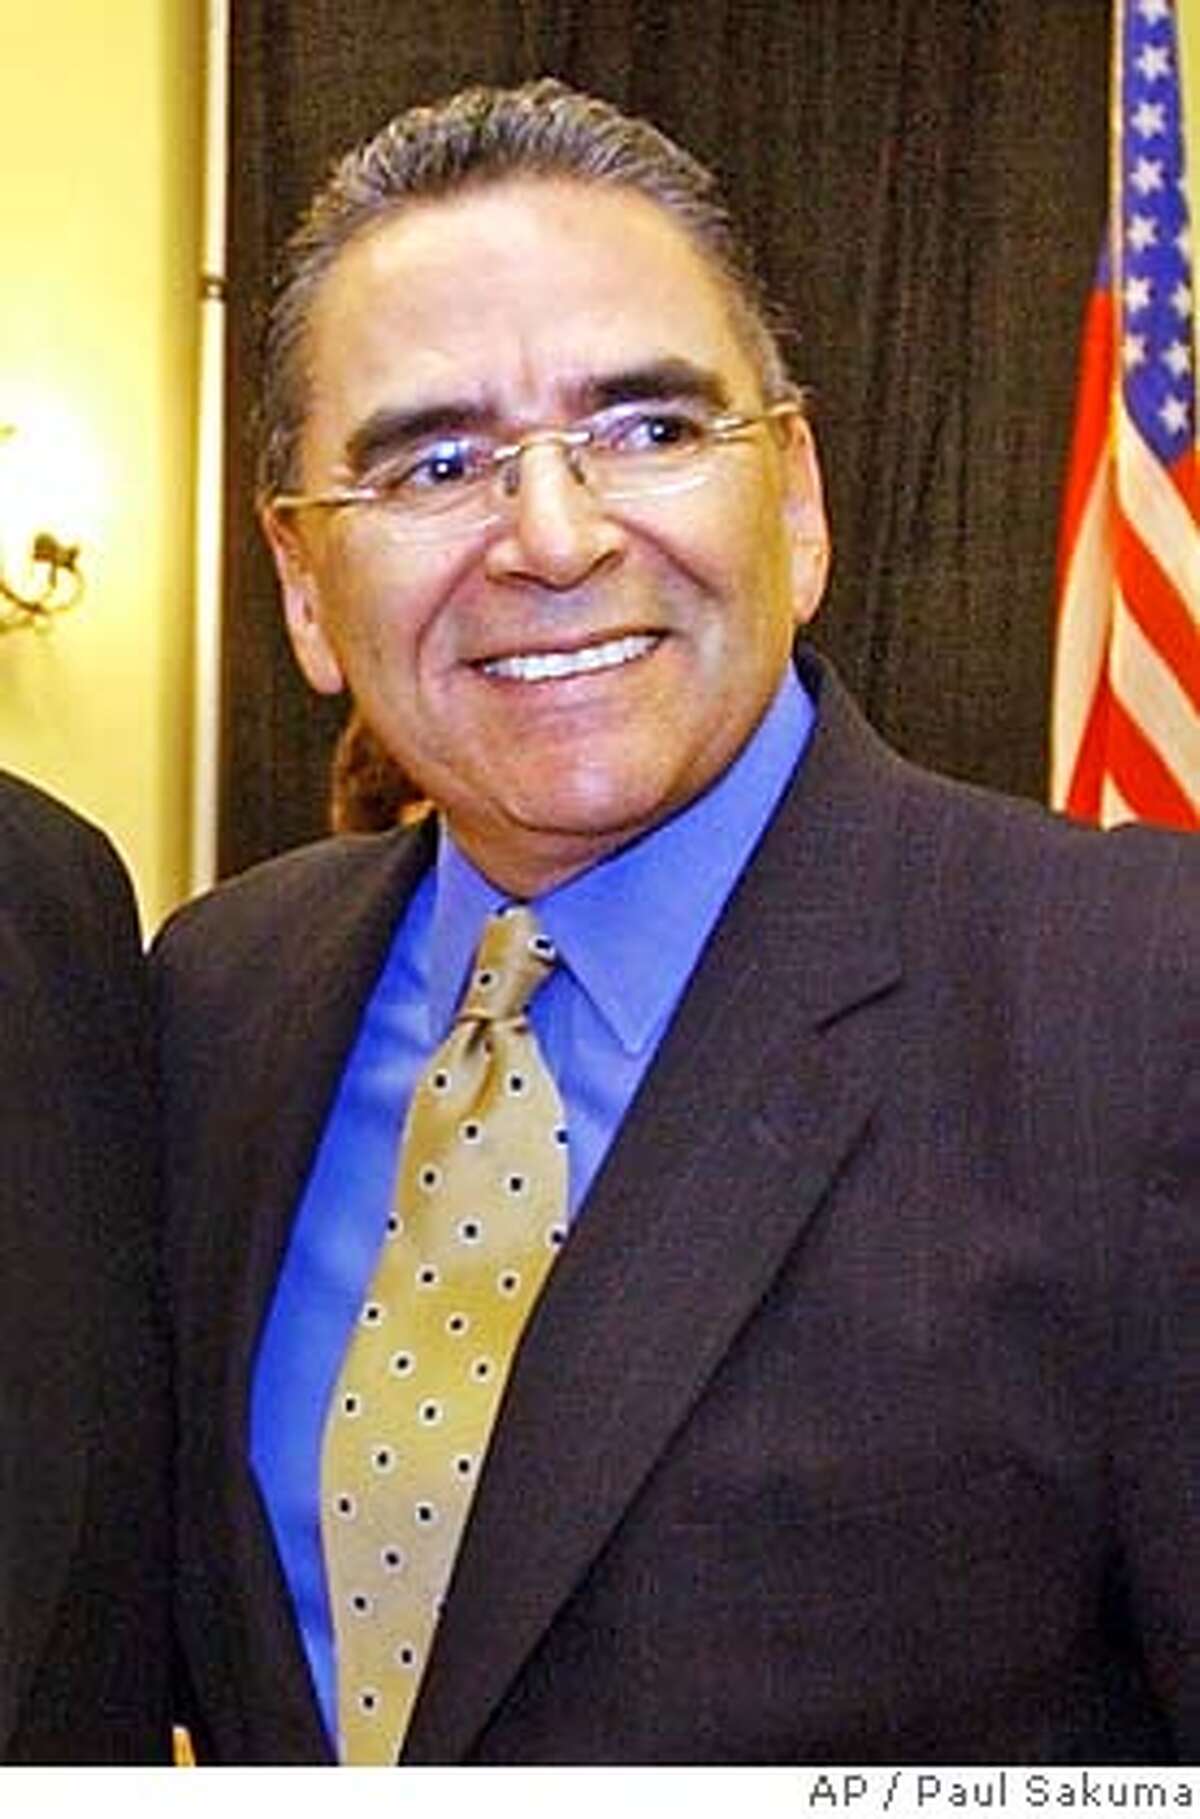 ** FILE ** San Jose Mayor Ron Gonzales smiles during a meeting with Silicon Valley business leaders in San Jose, Calif., Wednesday, April 14, 2004. A Santa Clara County judge dropped all criminal charges against Gonzales, who was accused of bribery in an alleged backroom deal with a trash-hauling company, court officials said Tuesday, June 11, 2007. While Superior Court Judge John Herlihy said Gonzales and his aide Joe Guerra improperly concealed their dealings with Norcal Waste Systems Inc., improper instructions given to the grand jury that indicted the pair required him to throw out the charges. (AP Photo/Paul Sakuma, file)